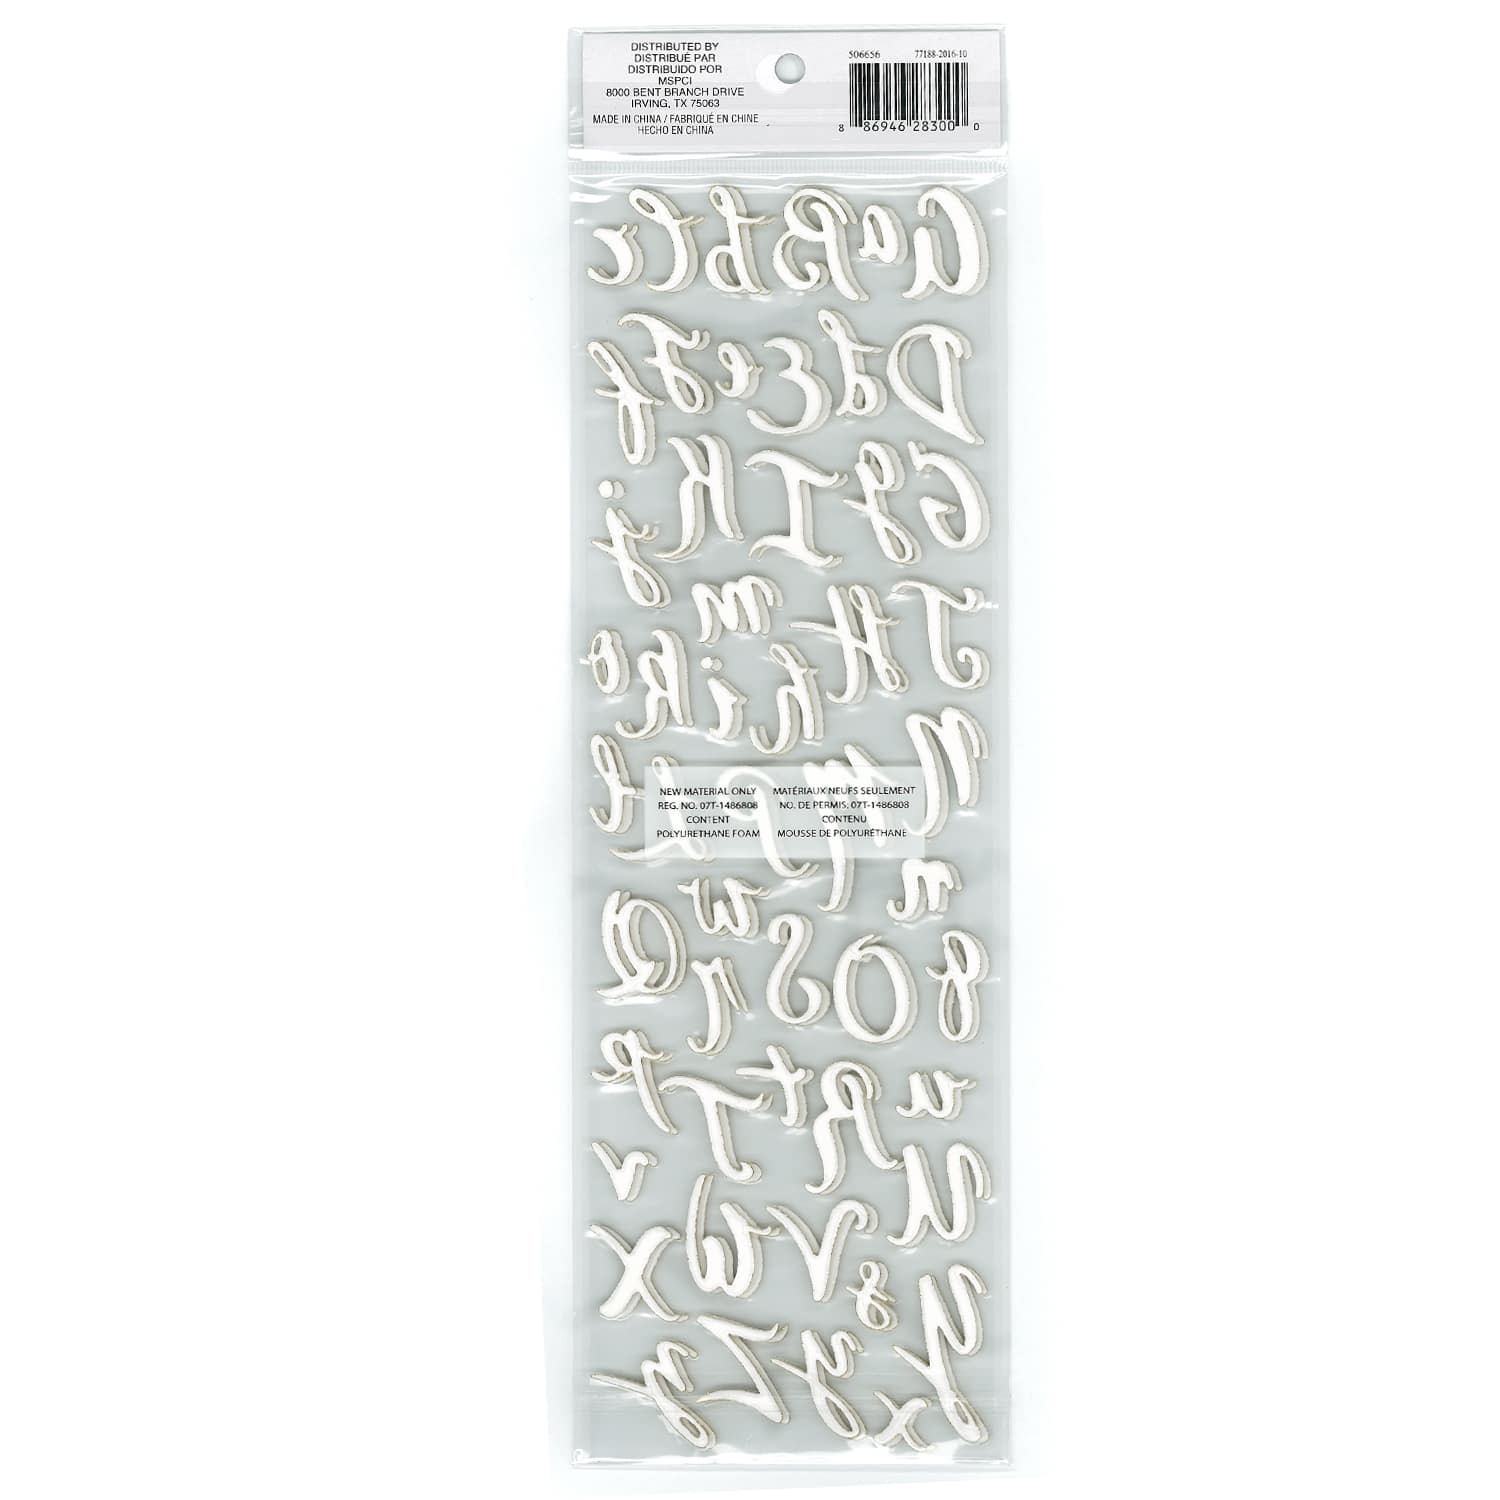 Shop for the Glitter Puffy Alphabet Stickers By Recollections™ at Michaels